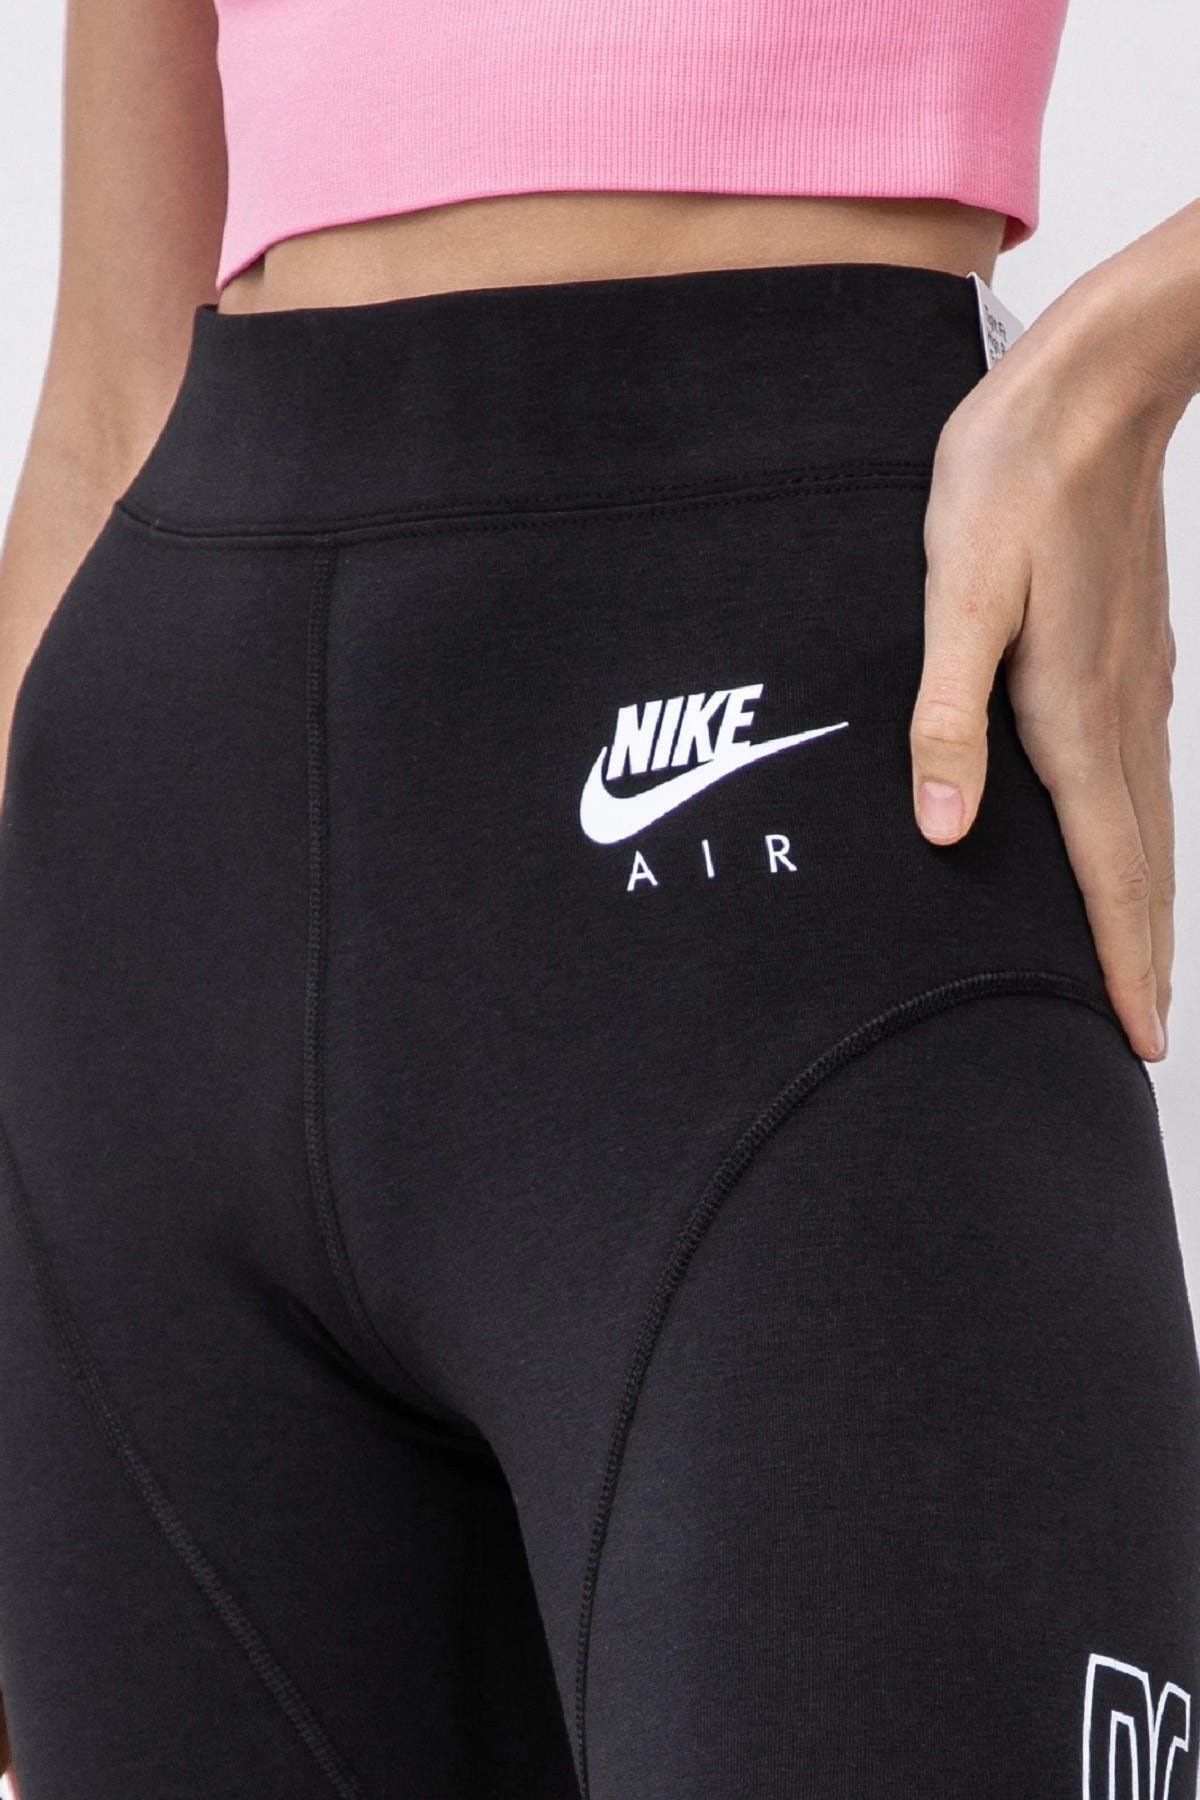 Nike Power Sculpt Hyper Tight Fit High Waisted Sculpting Black Sports Tights  - Trendyol